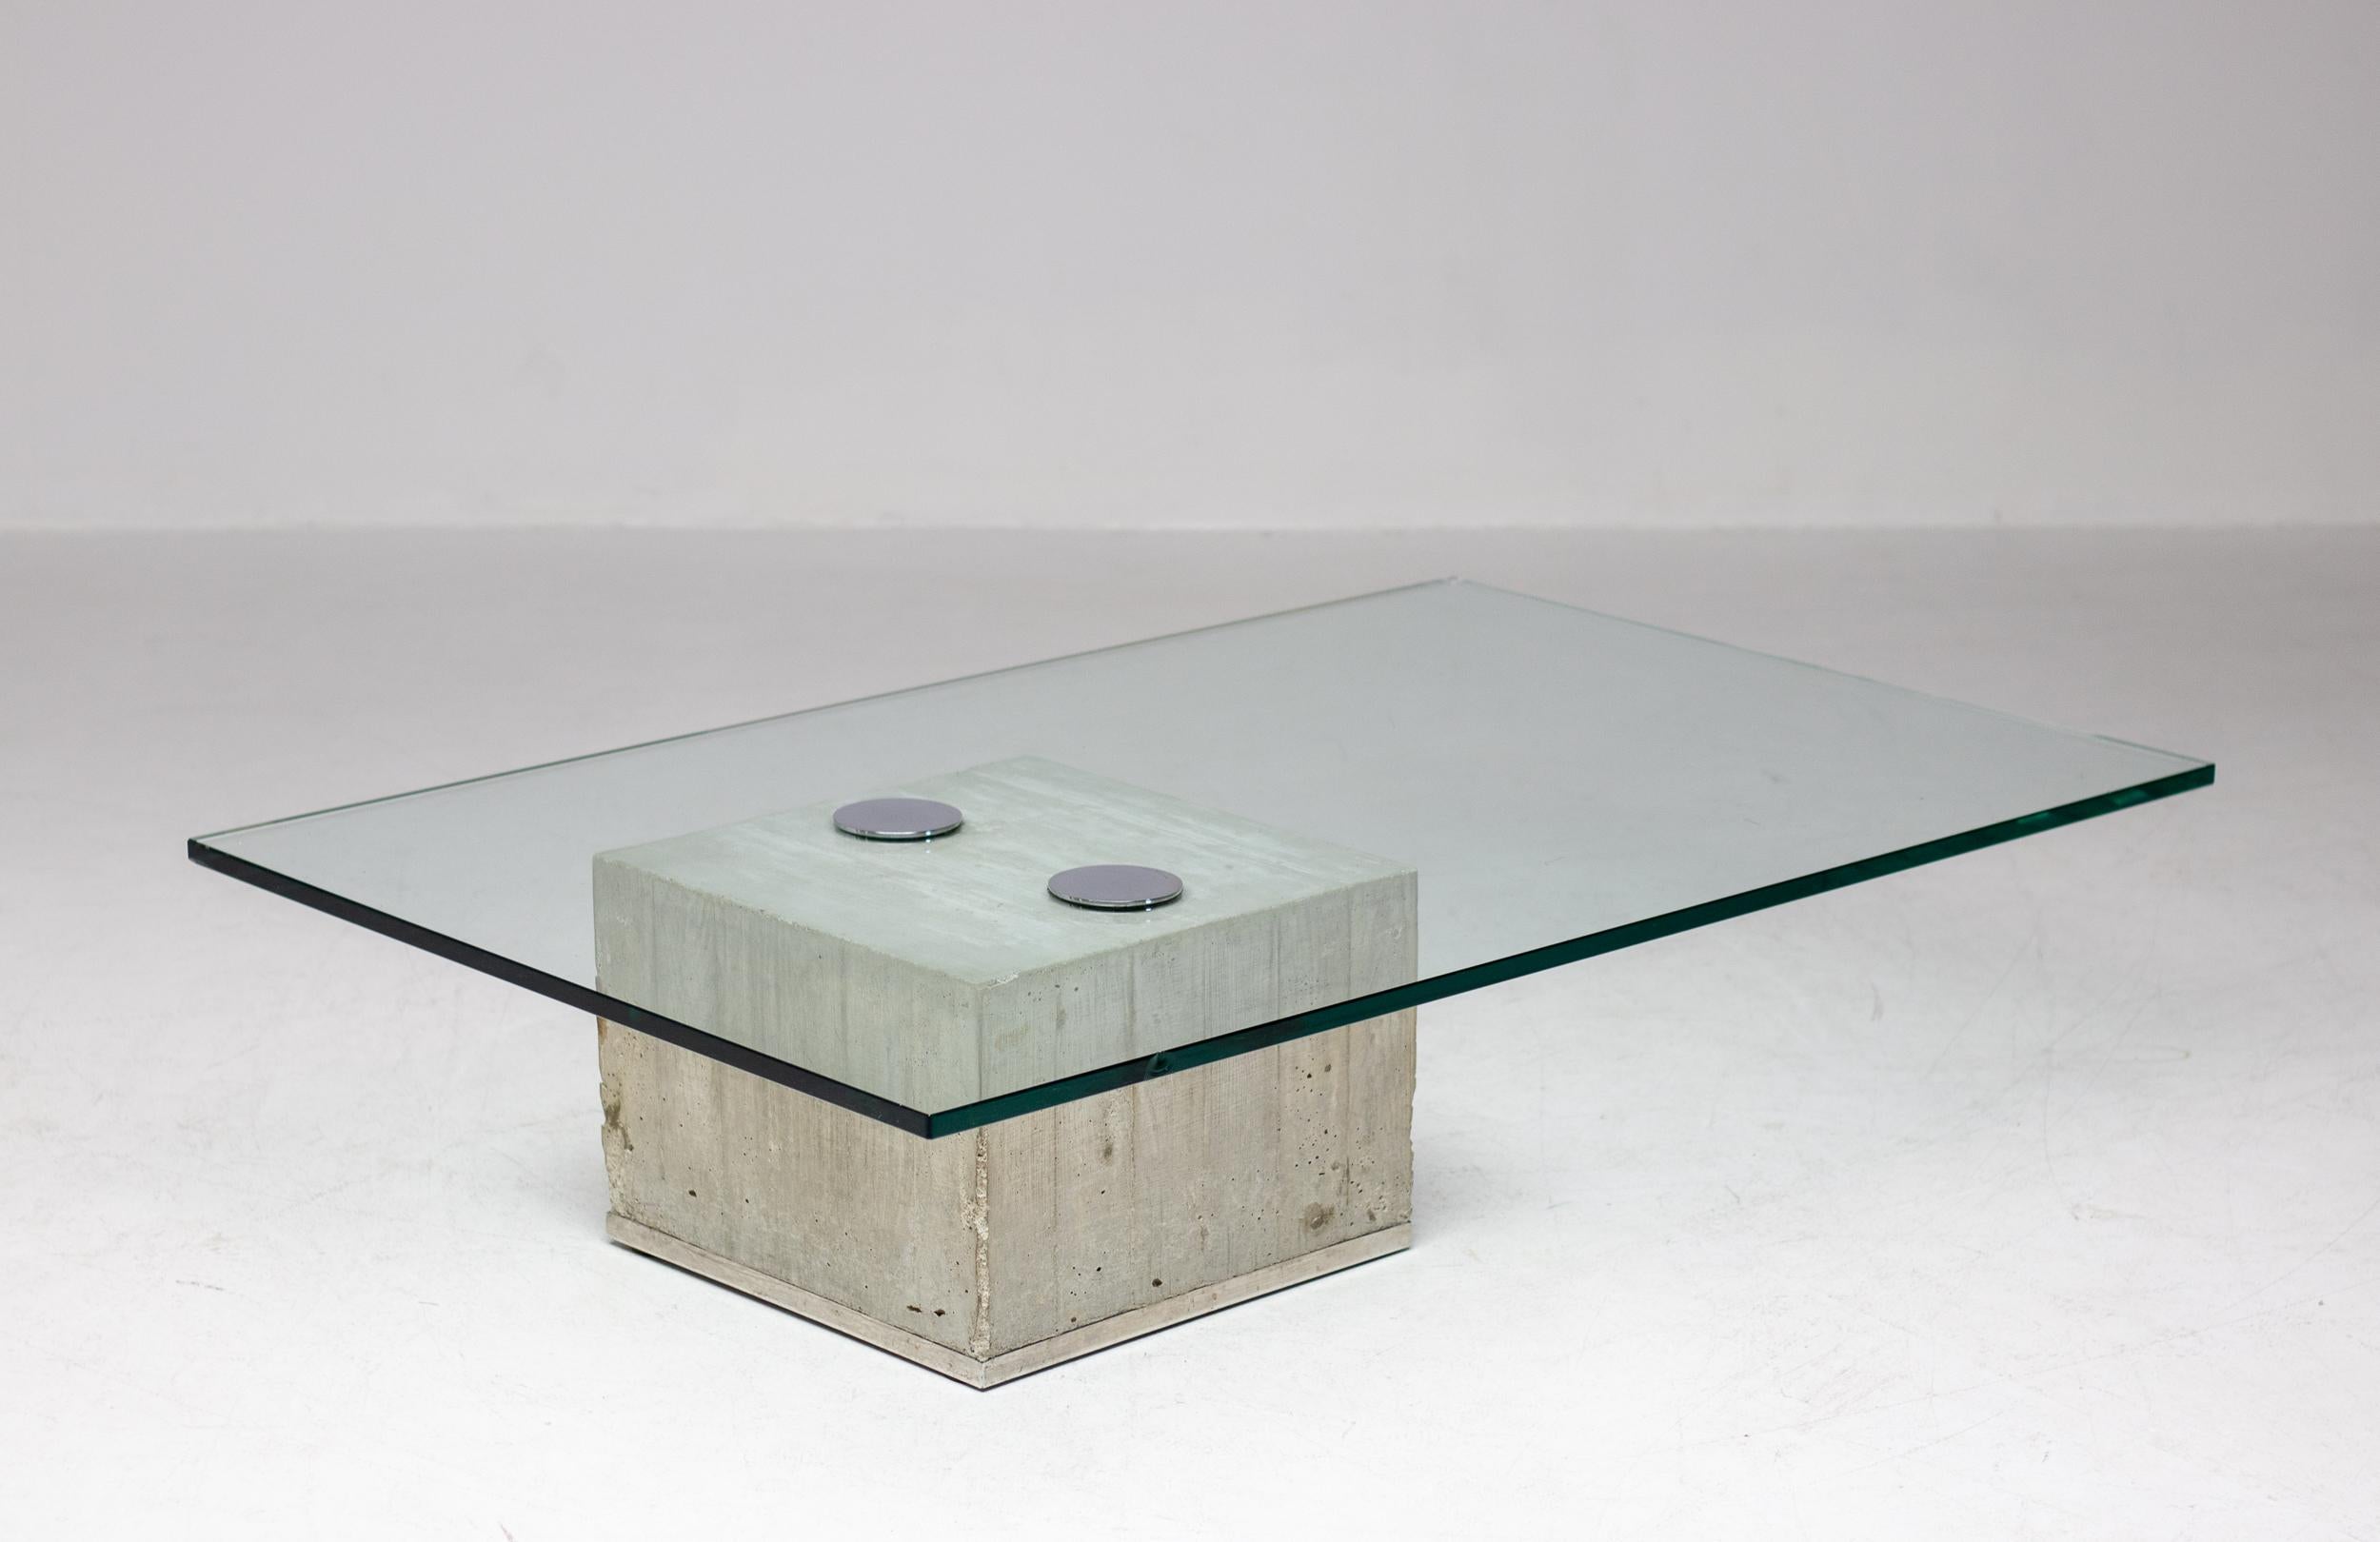 Brutalist concrete coffee table 'Sapo', made in glass, concrete and chromed steel, designed by Sergio & Giorgio Saporiti for Saporiti, Italy, 1972.  This table called model 'Sapo' is made of a solid concrete base with a glass top attached. Due to